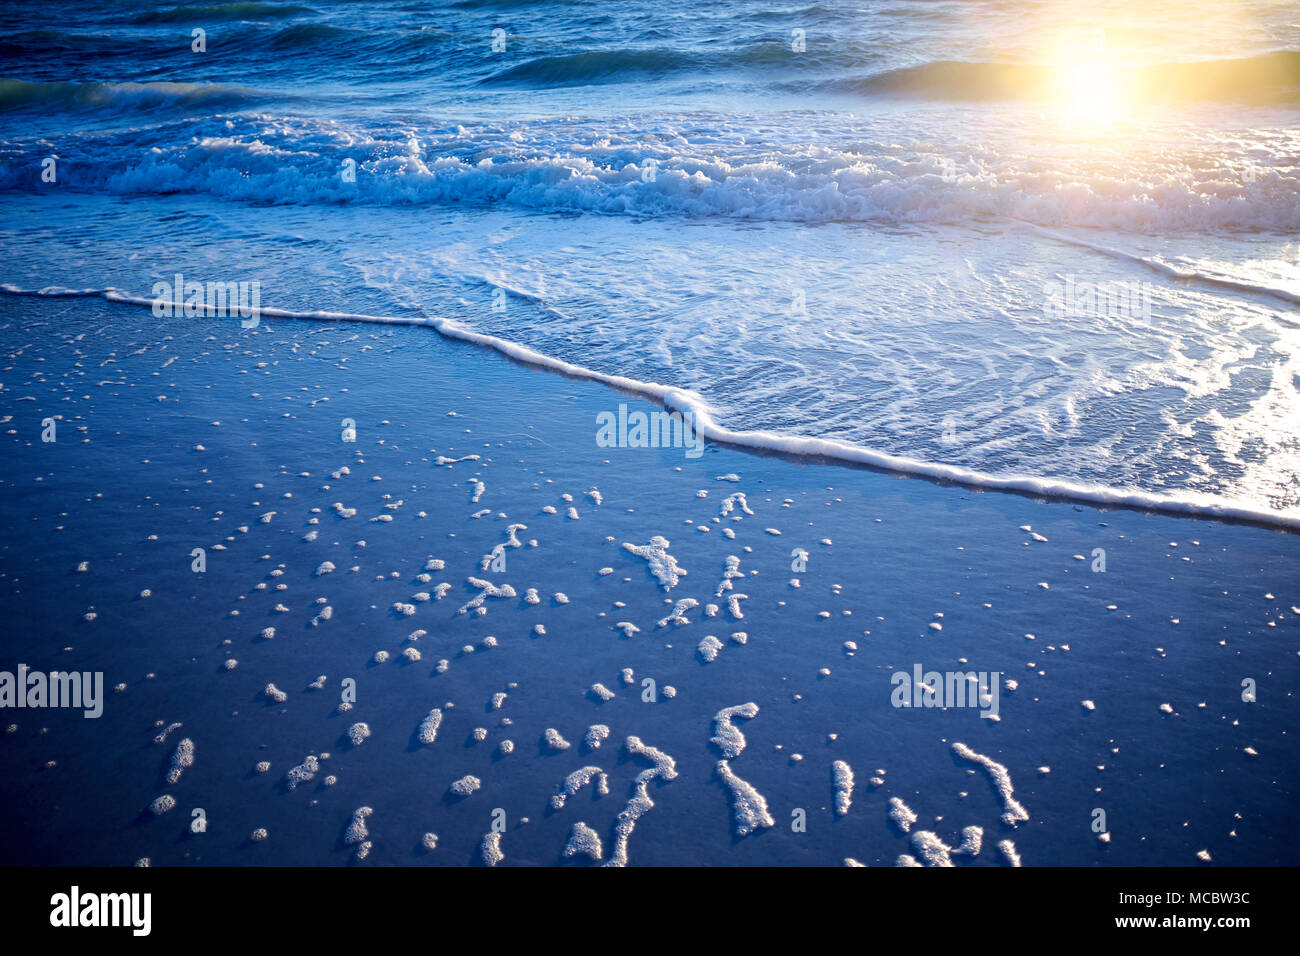 Low angle view of sea foam on a beach at sunset lit by the glow of the sun left behind on the wet sand during the ebb and flow of the surf on Anna Mar Stock Photo